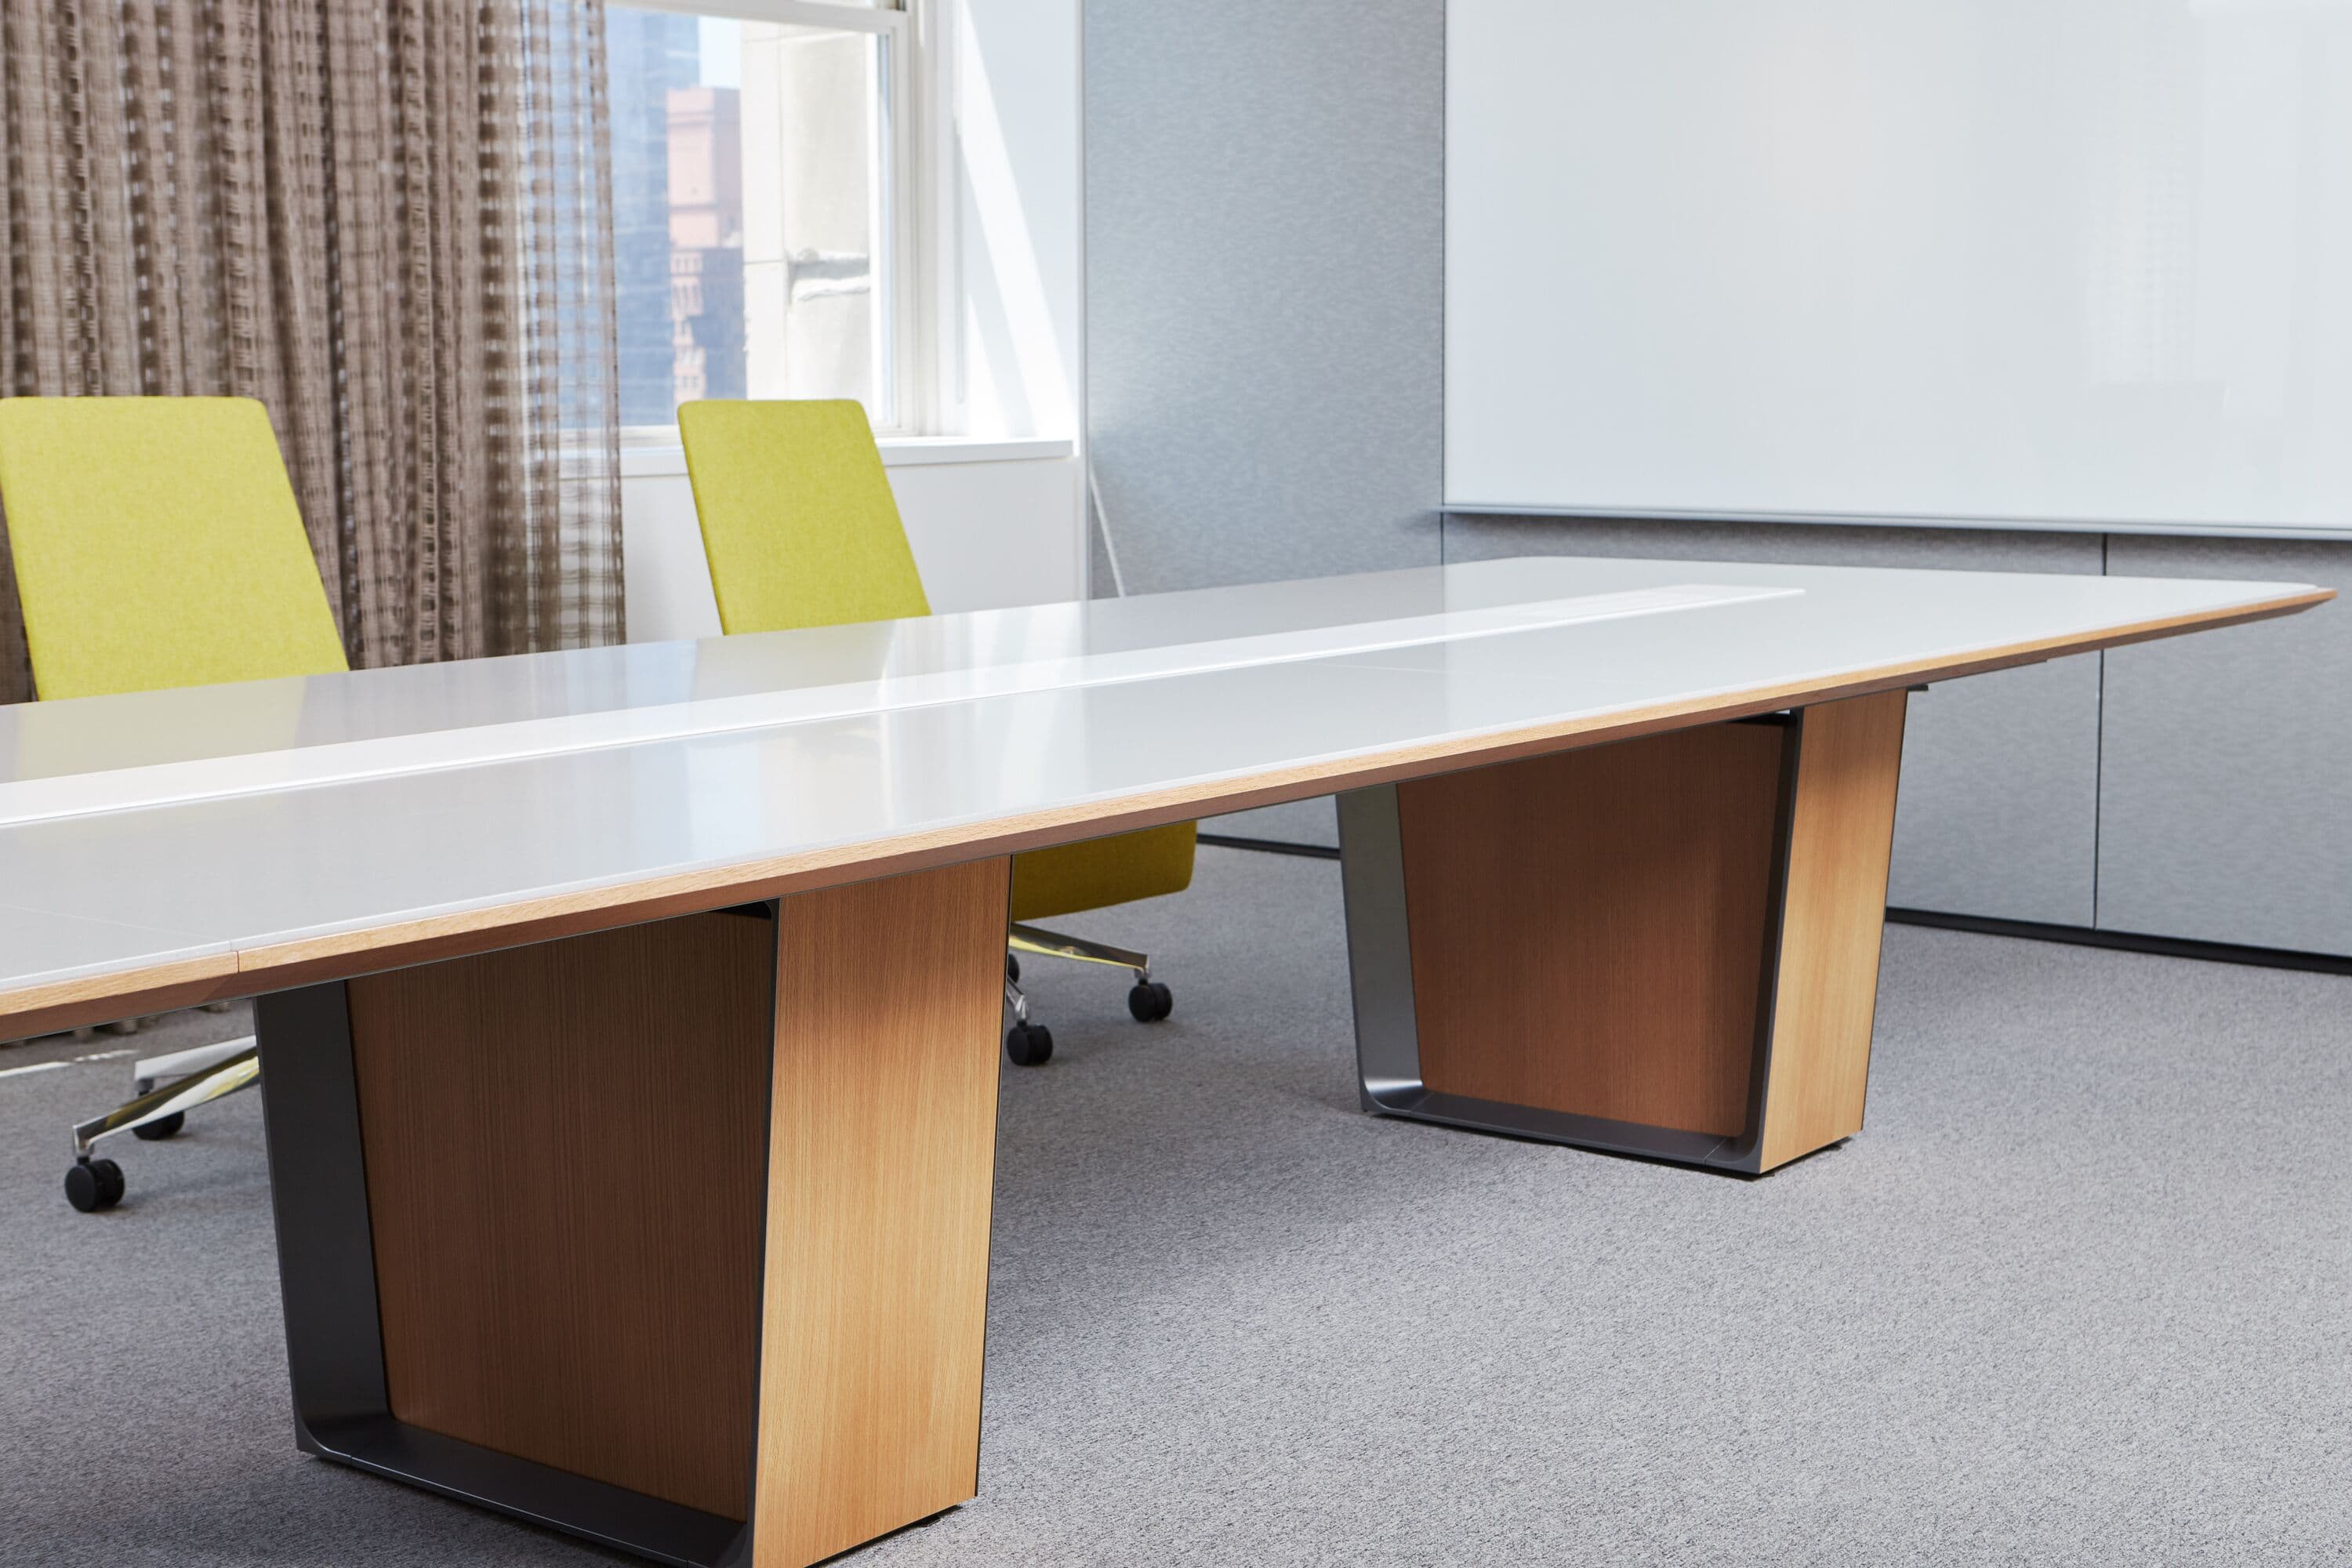 C+D Boardroom table by Teknion